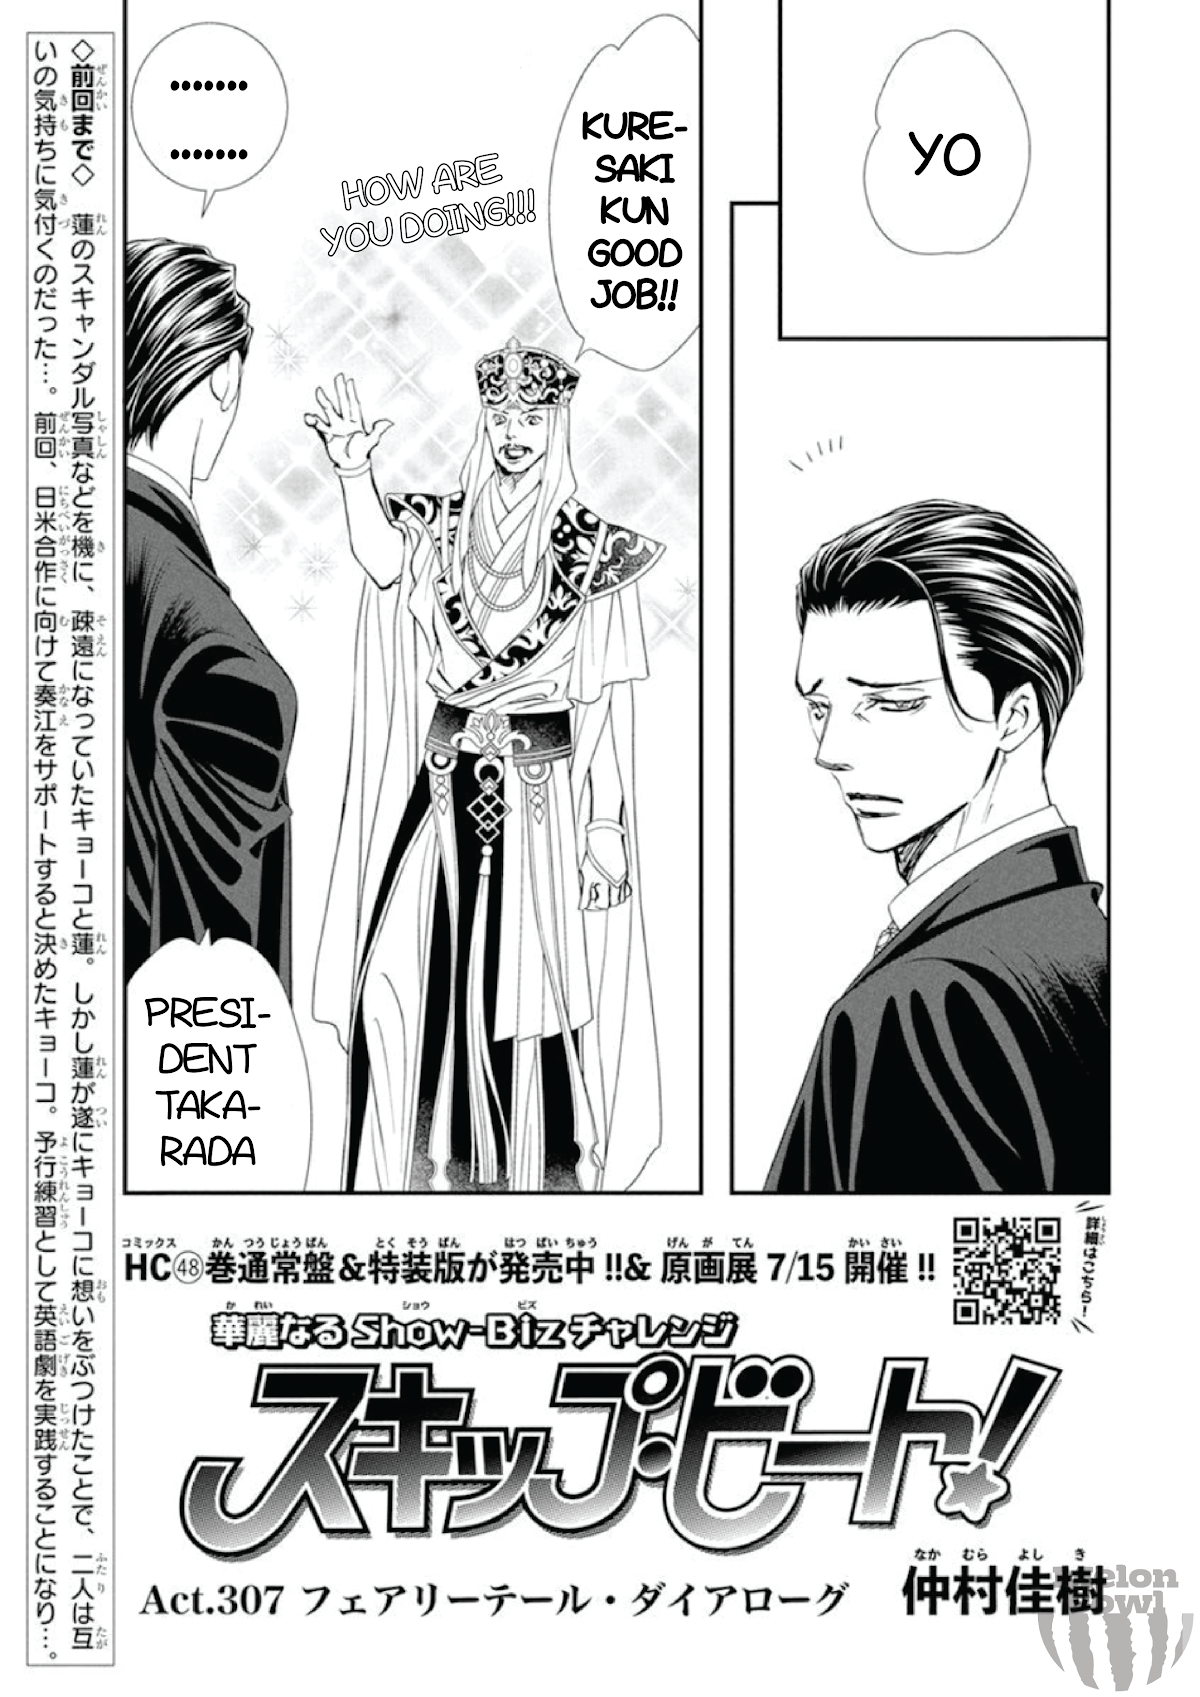 Skip Beat!, Chapter 307 Fairytale Dialogue image 02